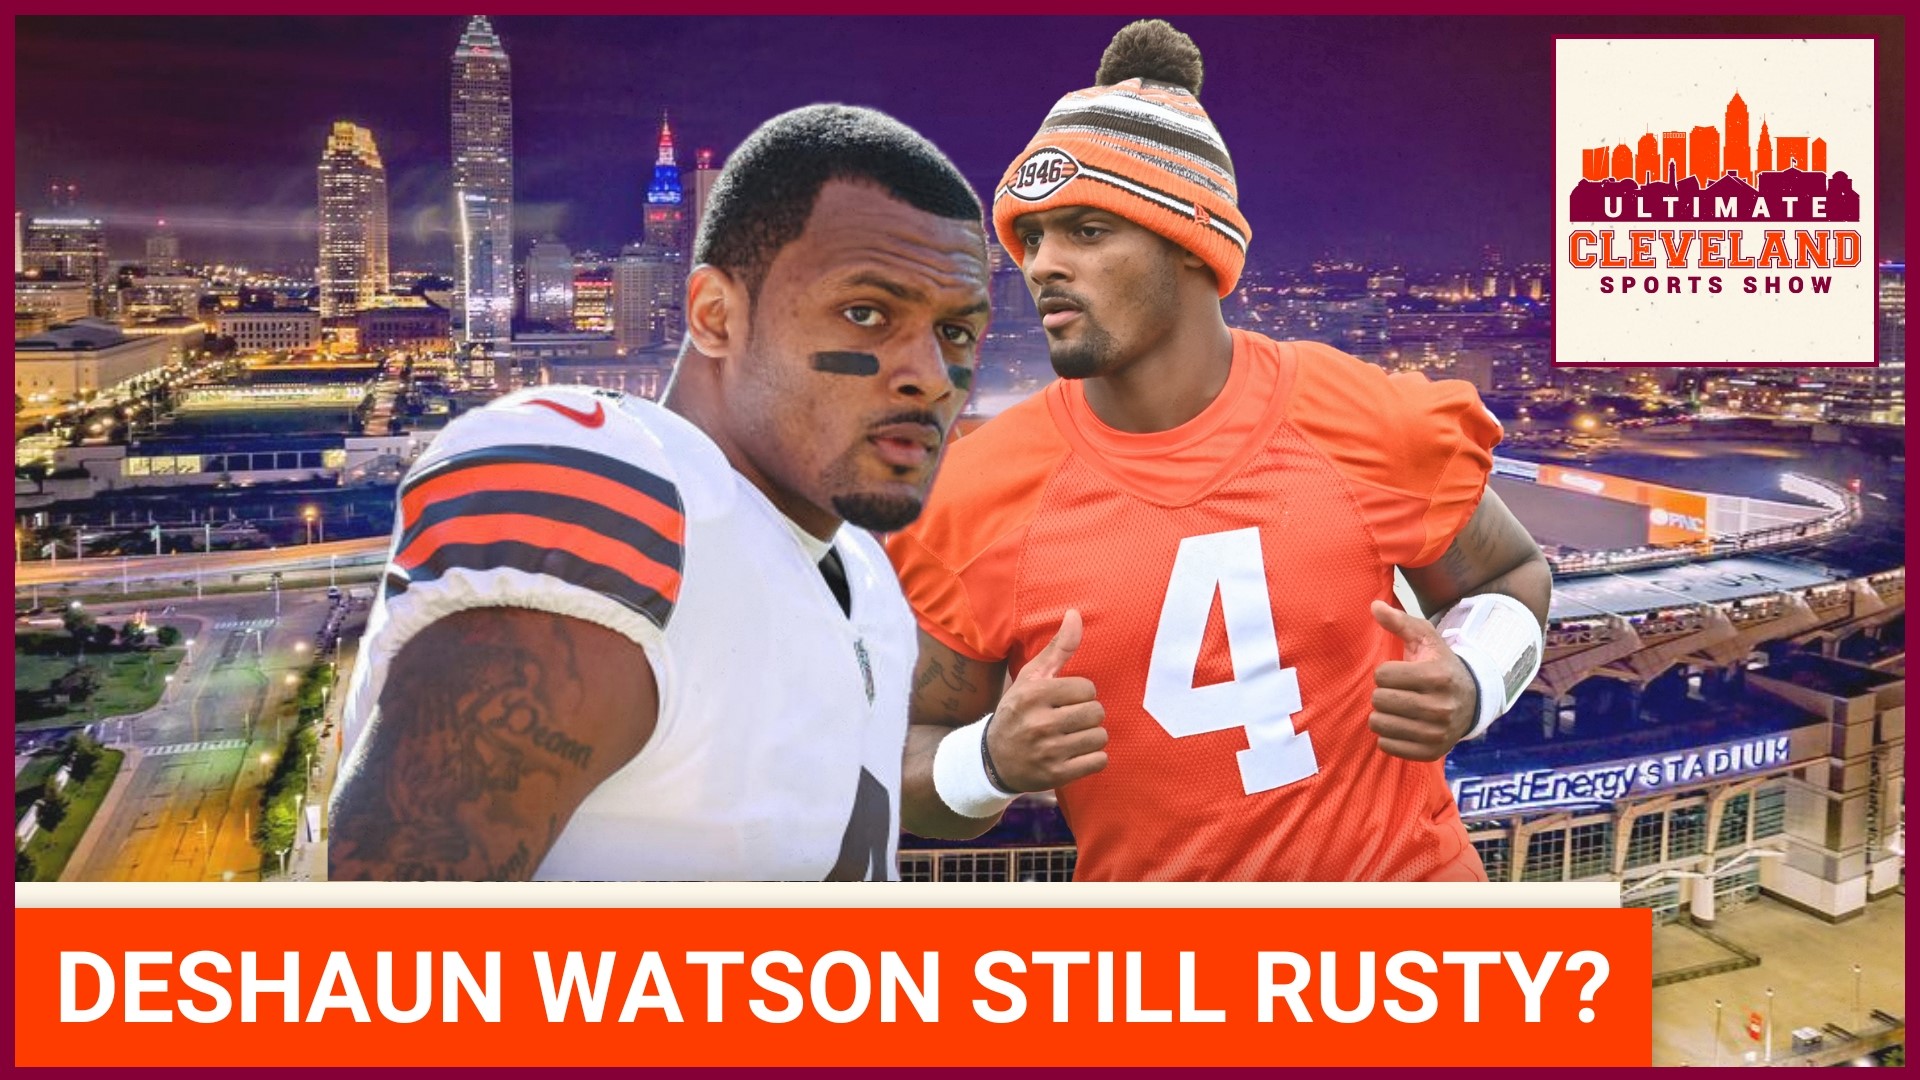 Do you appreciate how Deshaun Watson responded to the questions about being rusty?